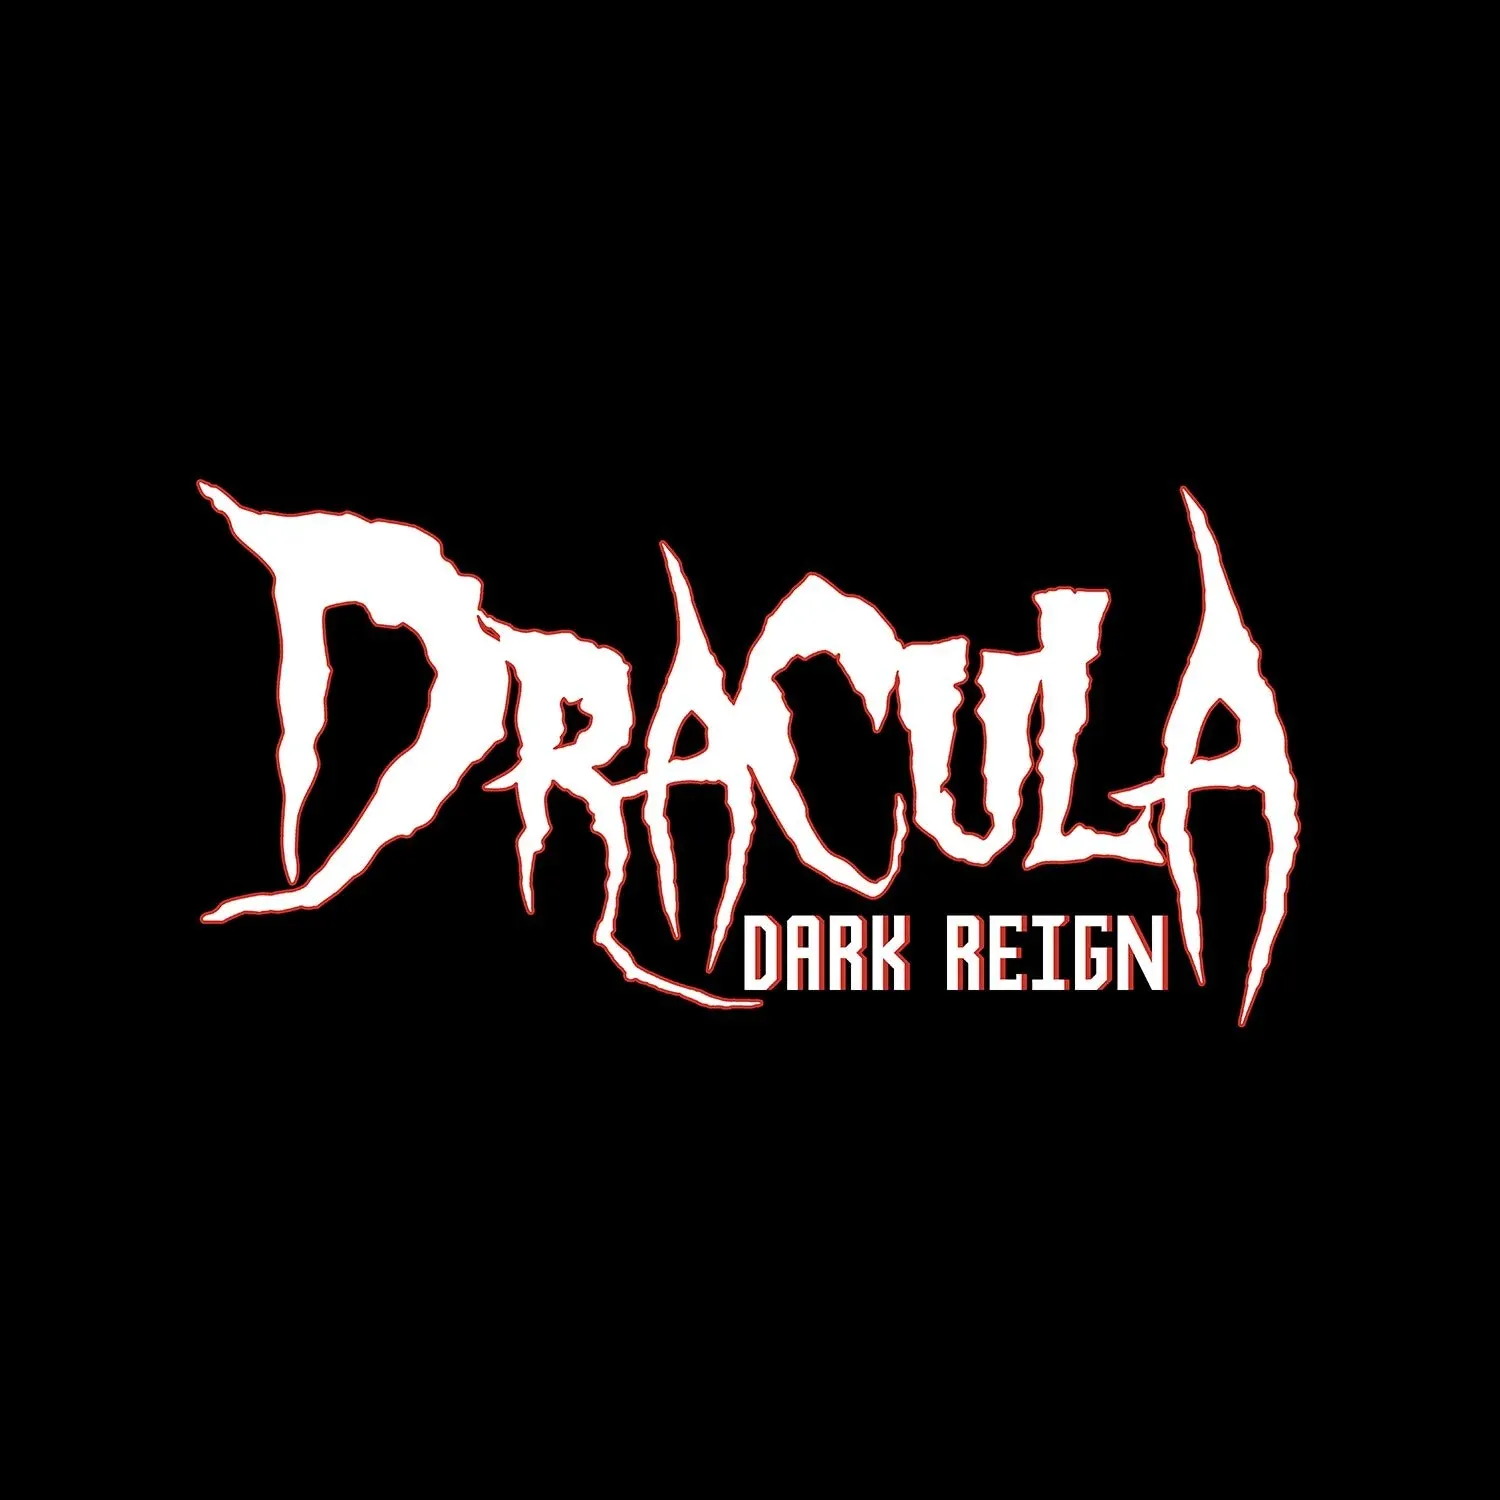 Dracula: Dark Reign - The First Official Stoker Family Video Game for Game Boy Color Arriving Soon